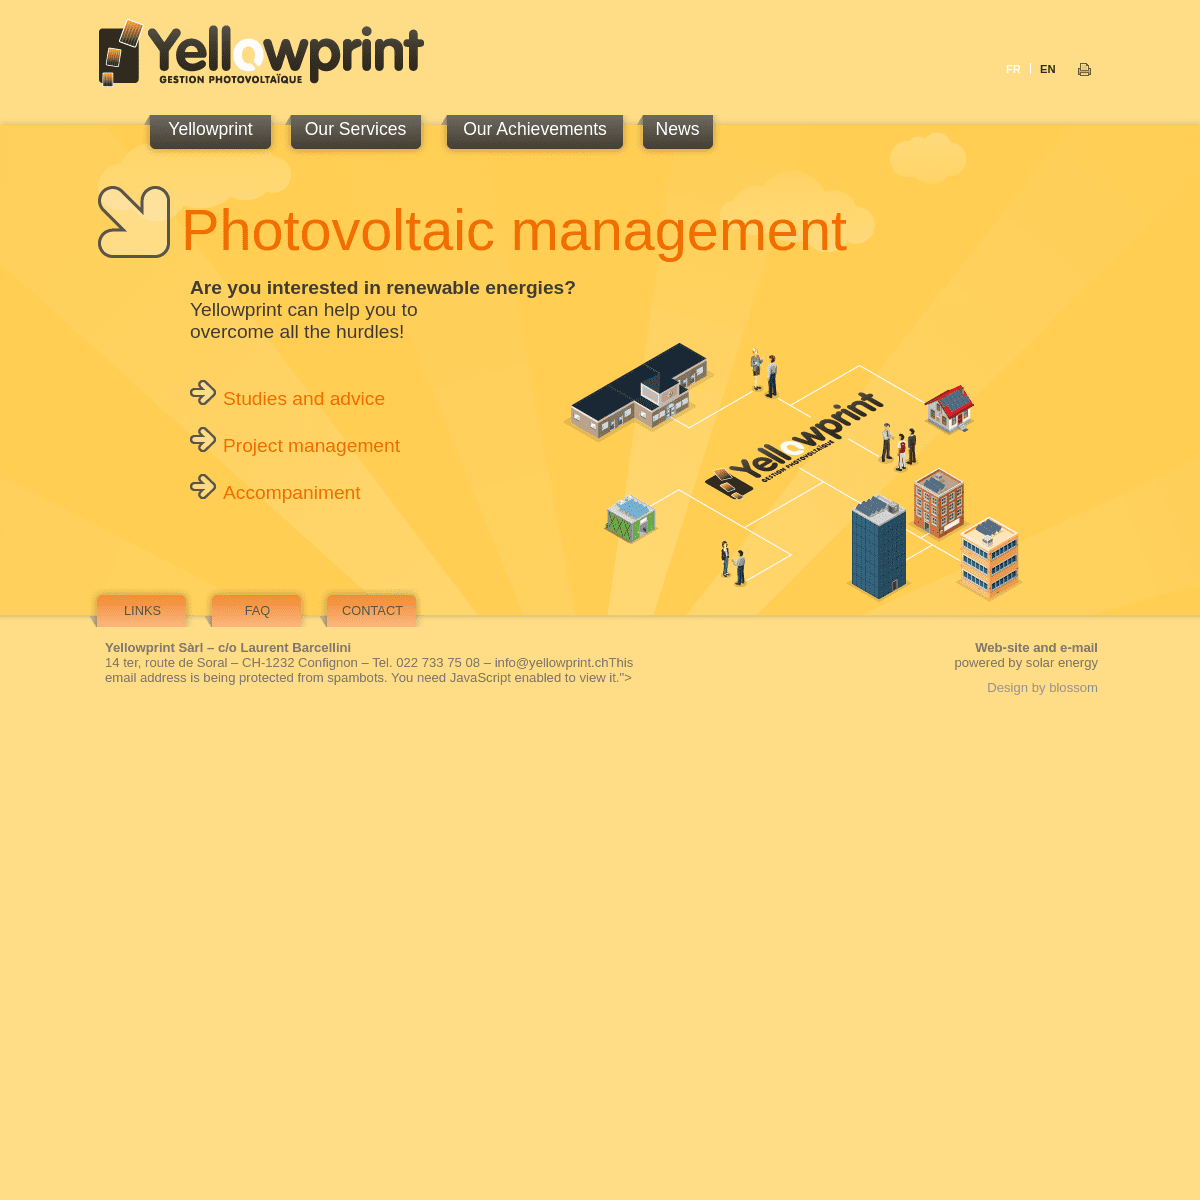 A complete backup of https://yellowprint.ch